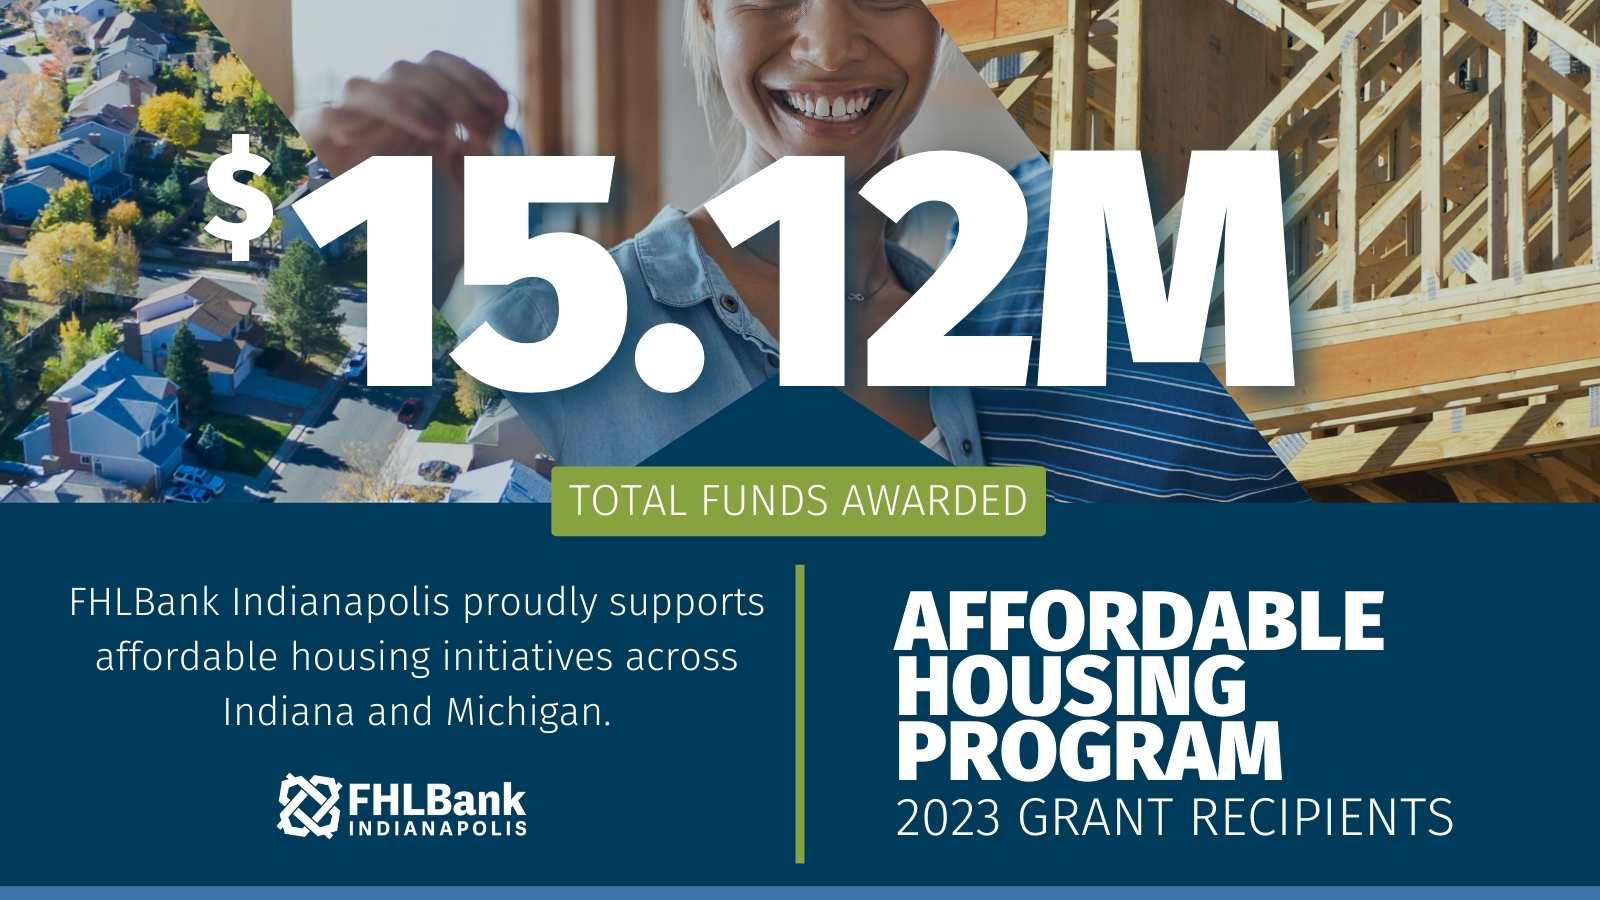 Federal Home Loan Bank of Indianapolis awards $15.12 million in Affordable Housing Program grants